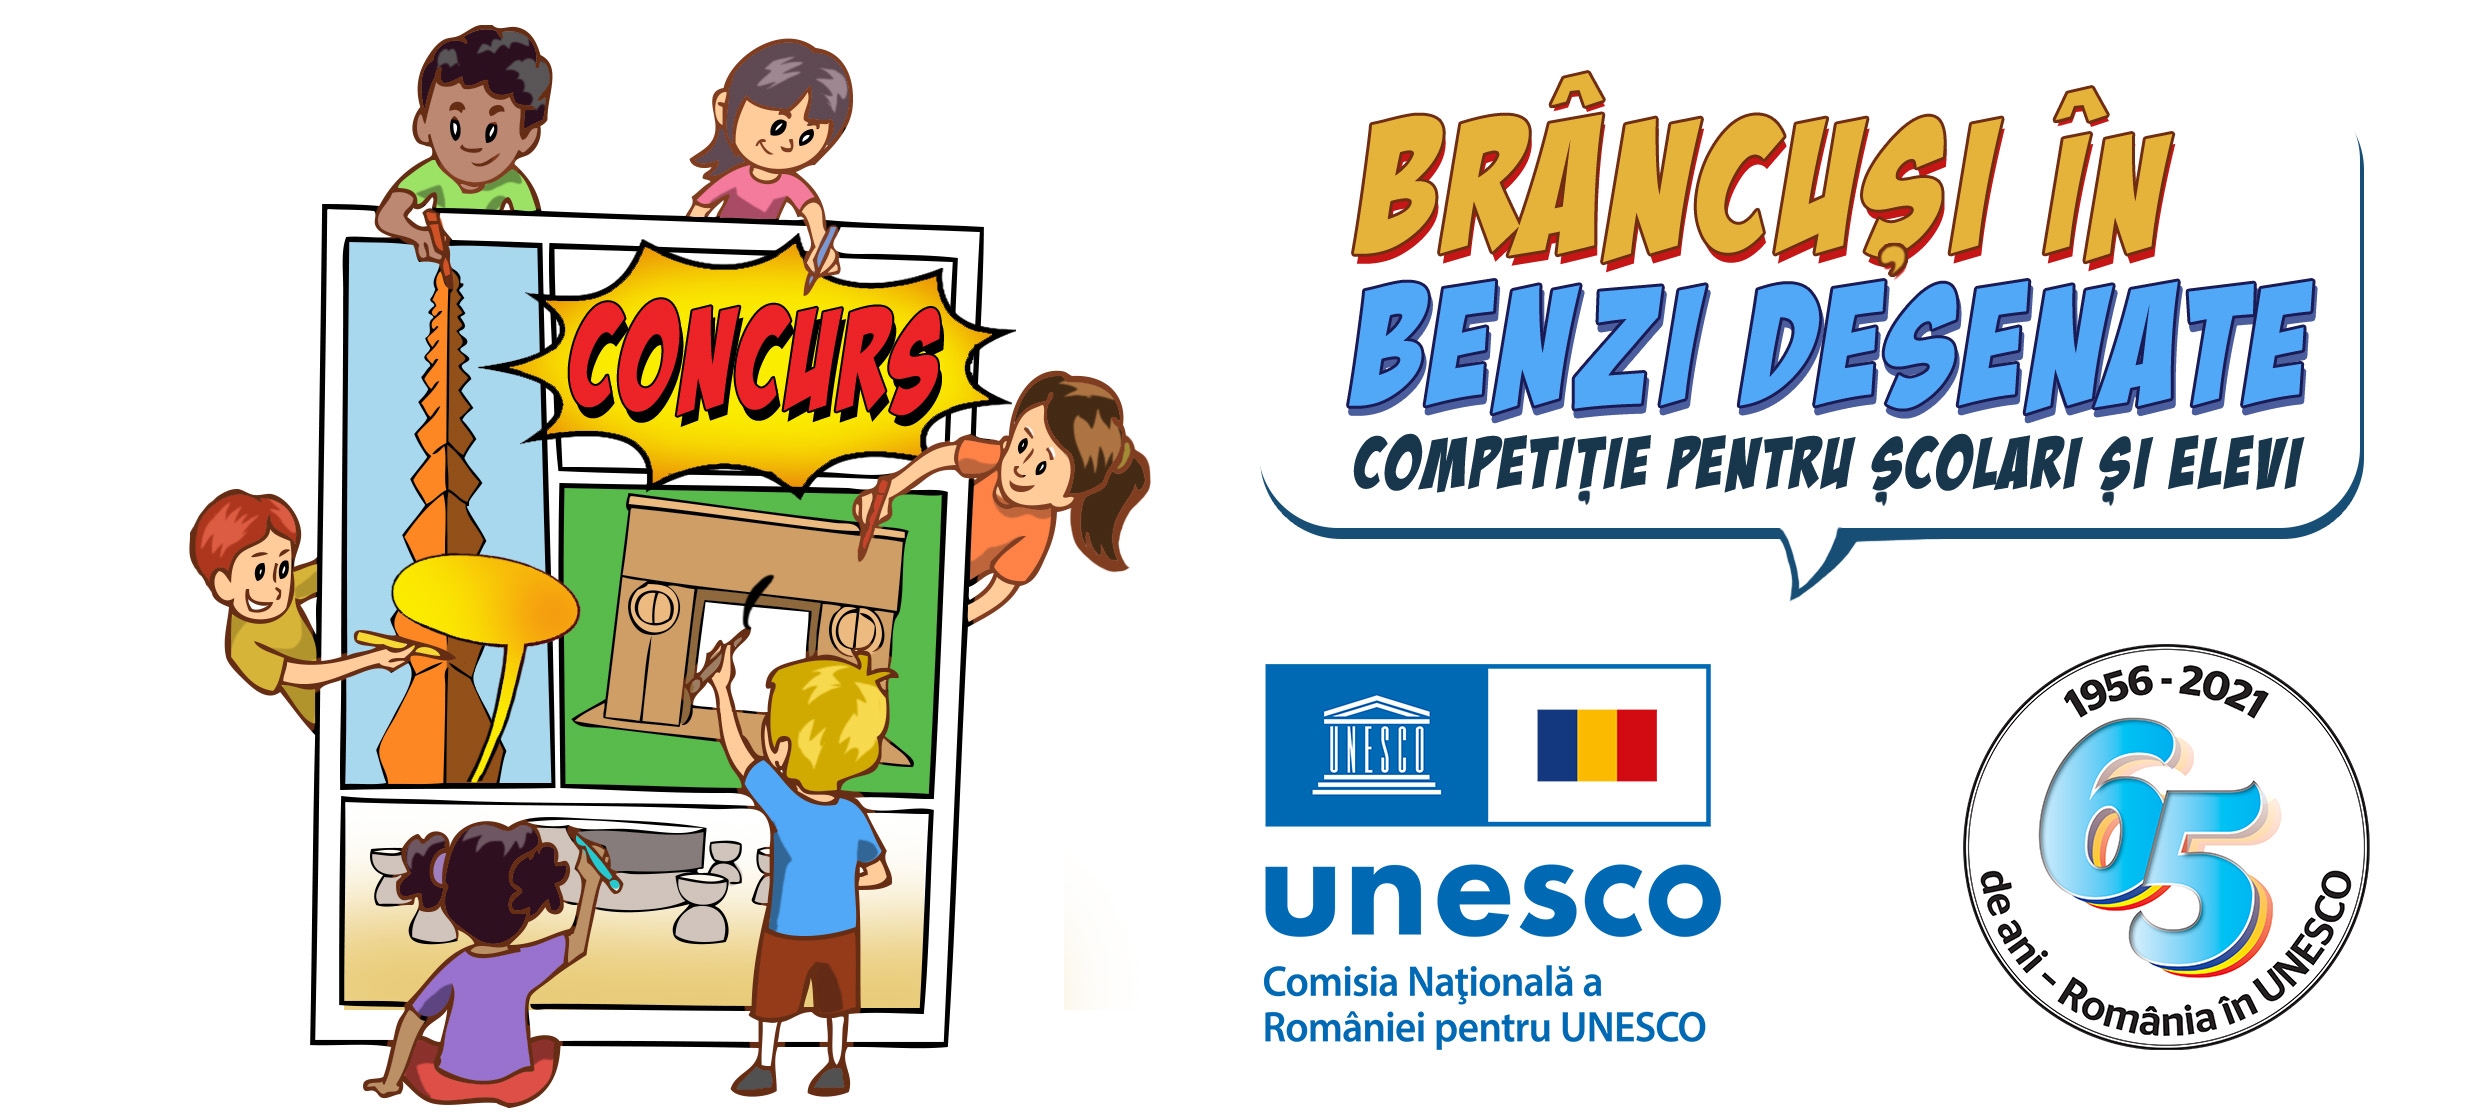 Students and teachers from Bulgaria, Montenegro, North Macedonia, Republic of Moldova, Romania, Serbia and Ukraine promote together traditions in the UNESCO heritage